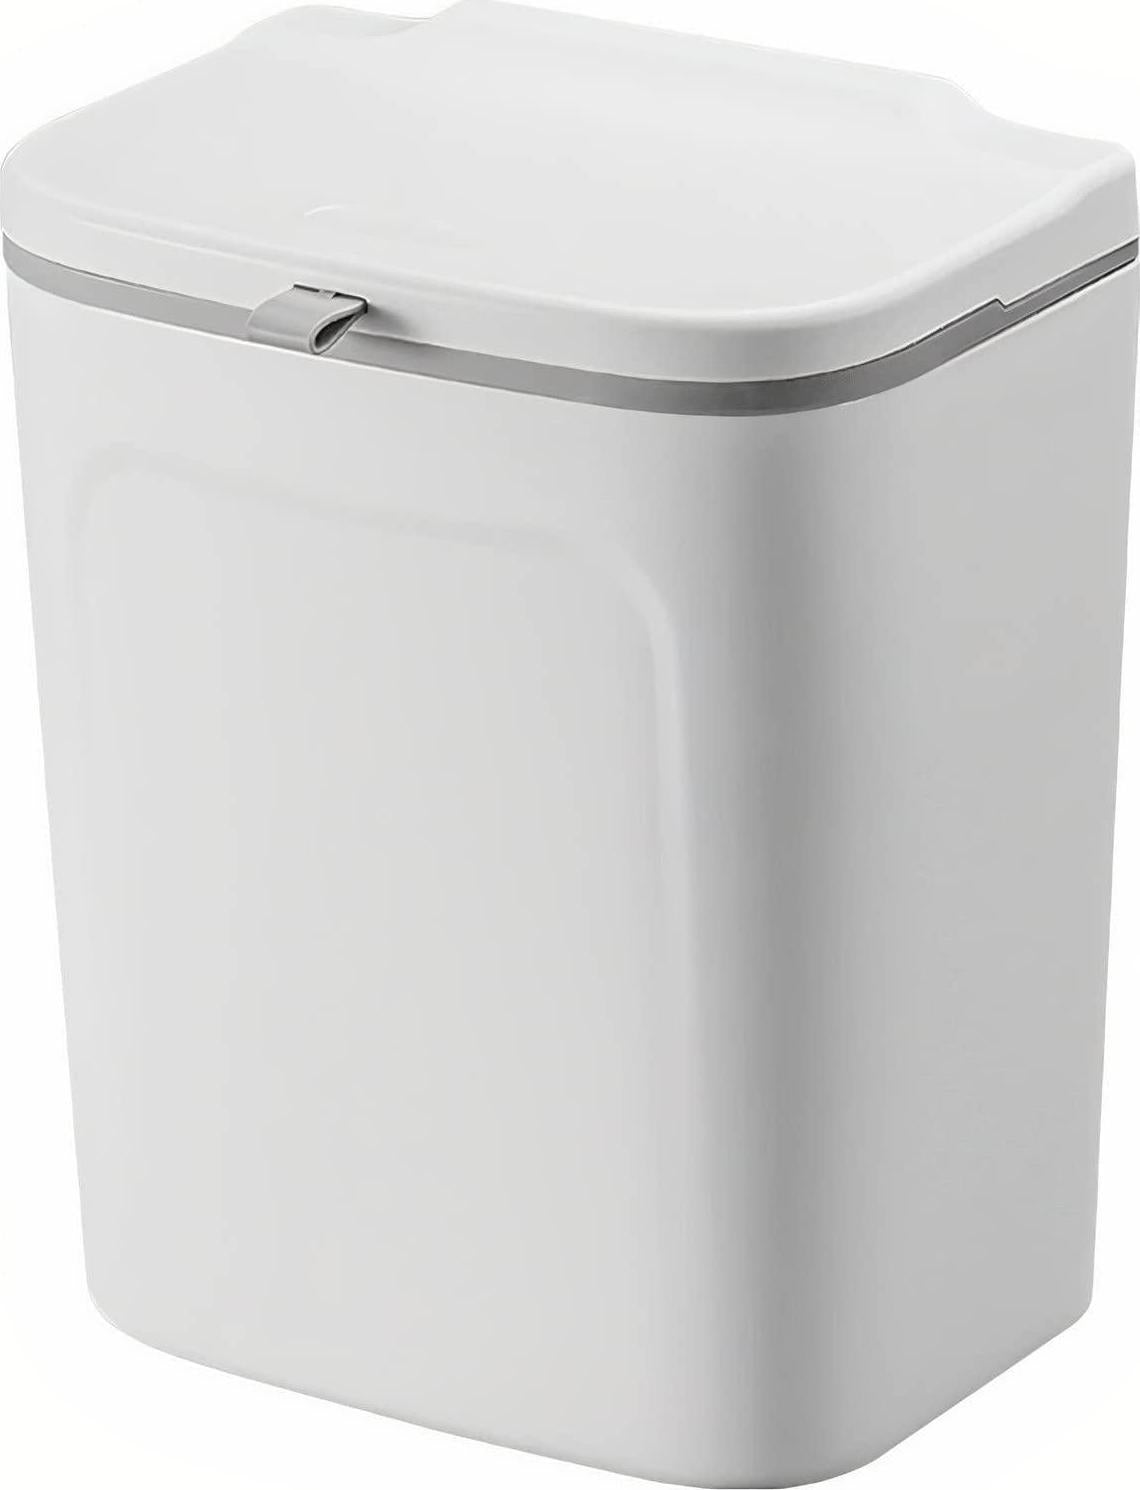 Mayfare, MAYFARE 9L Kitchen Compost/Rubbish Bin Hanging Trash Can Under Sink Wall Mounted with Sliding Cover Convenient Easy to Install Includes Wall Mounts (White)